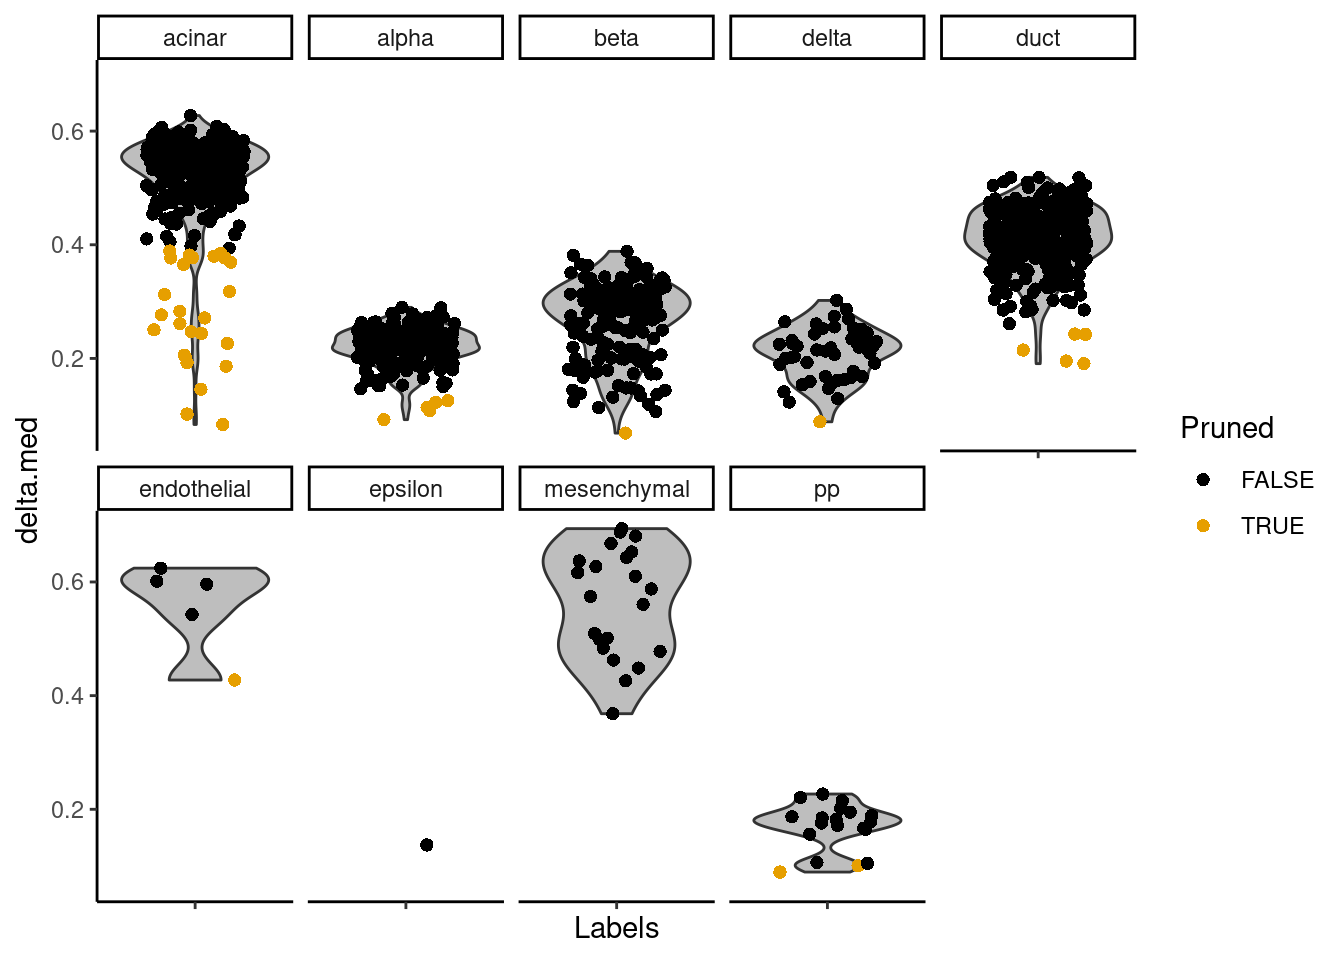 Distributions of the deltas for each cell in the Grun dataset assigned to each label in the Muraro dataset. Each cell is represented by a point; low-quality assignments that were pruned out are colored in orange.